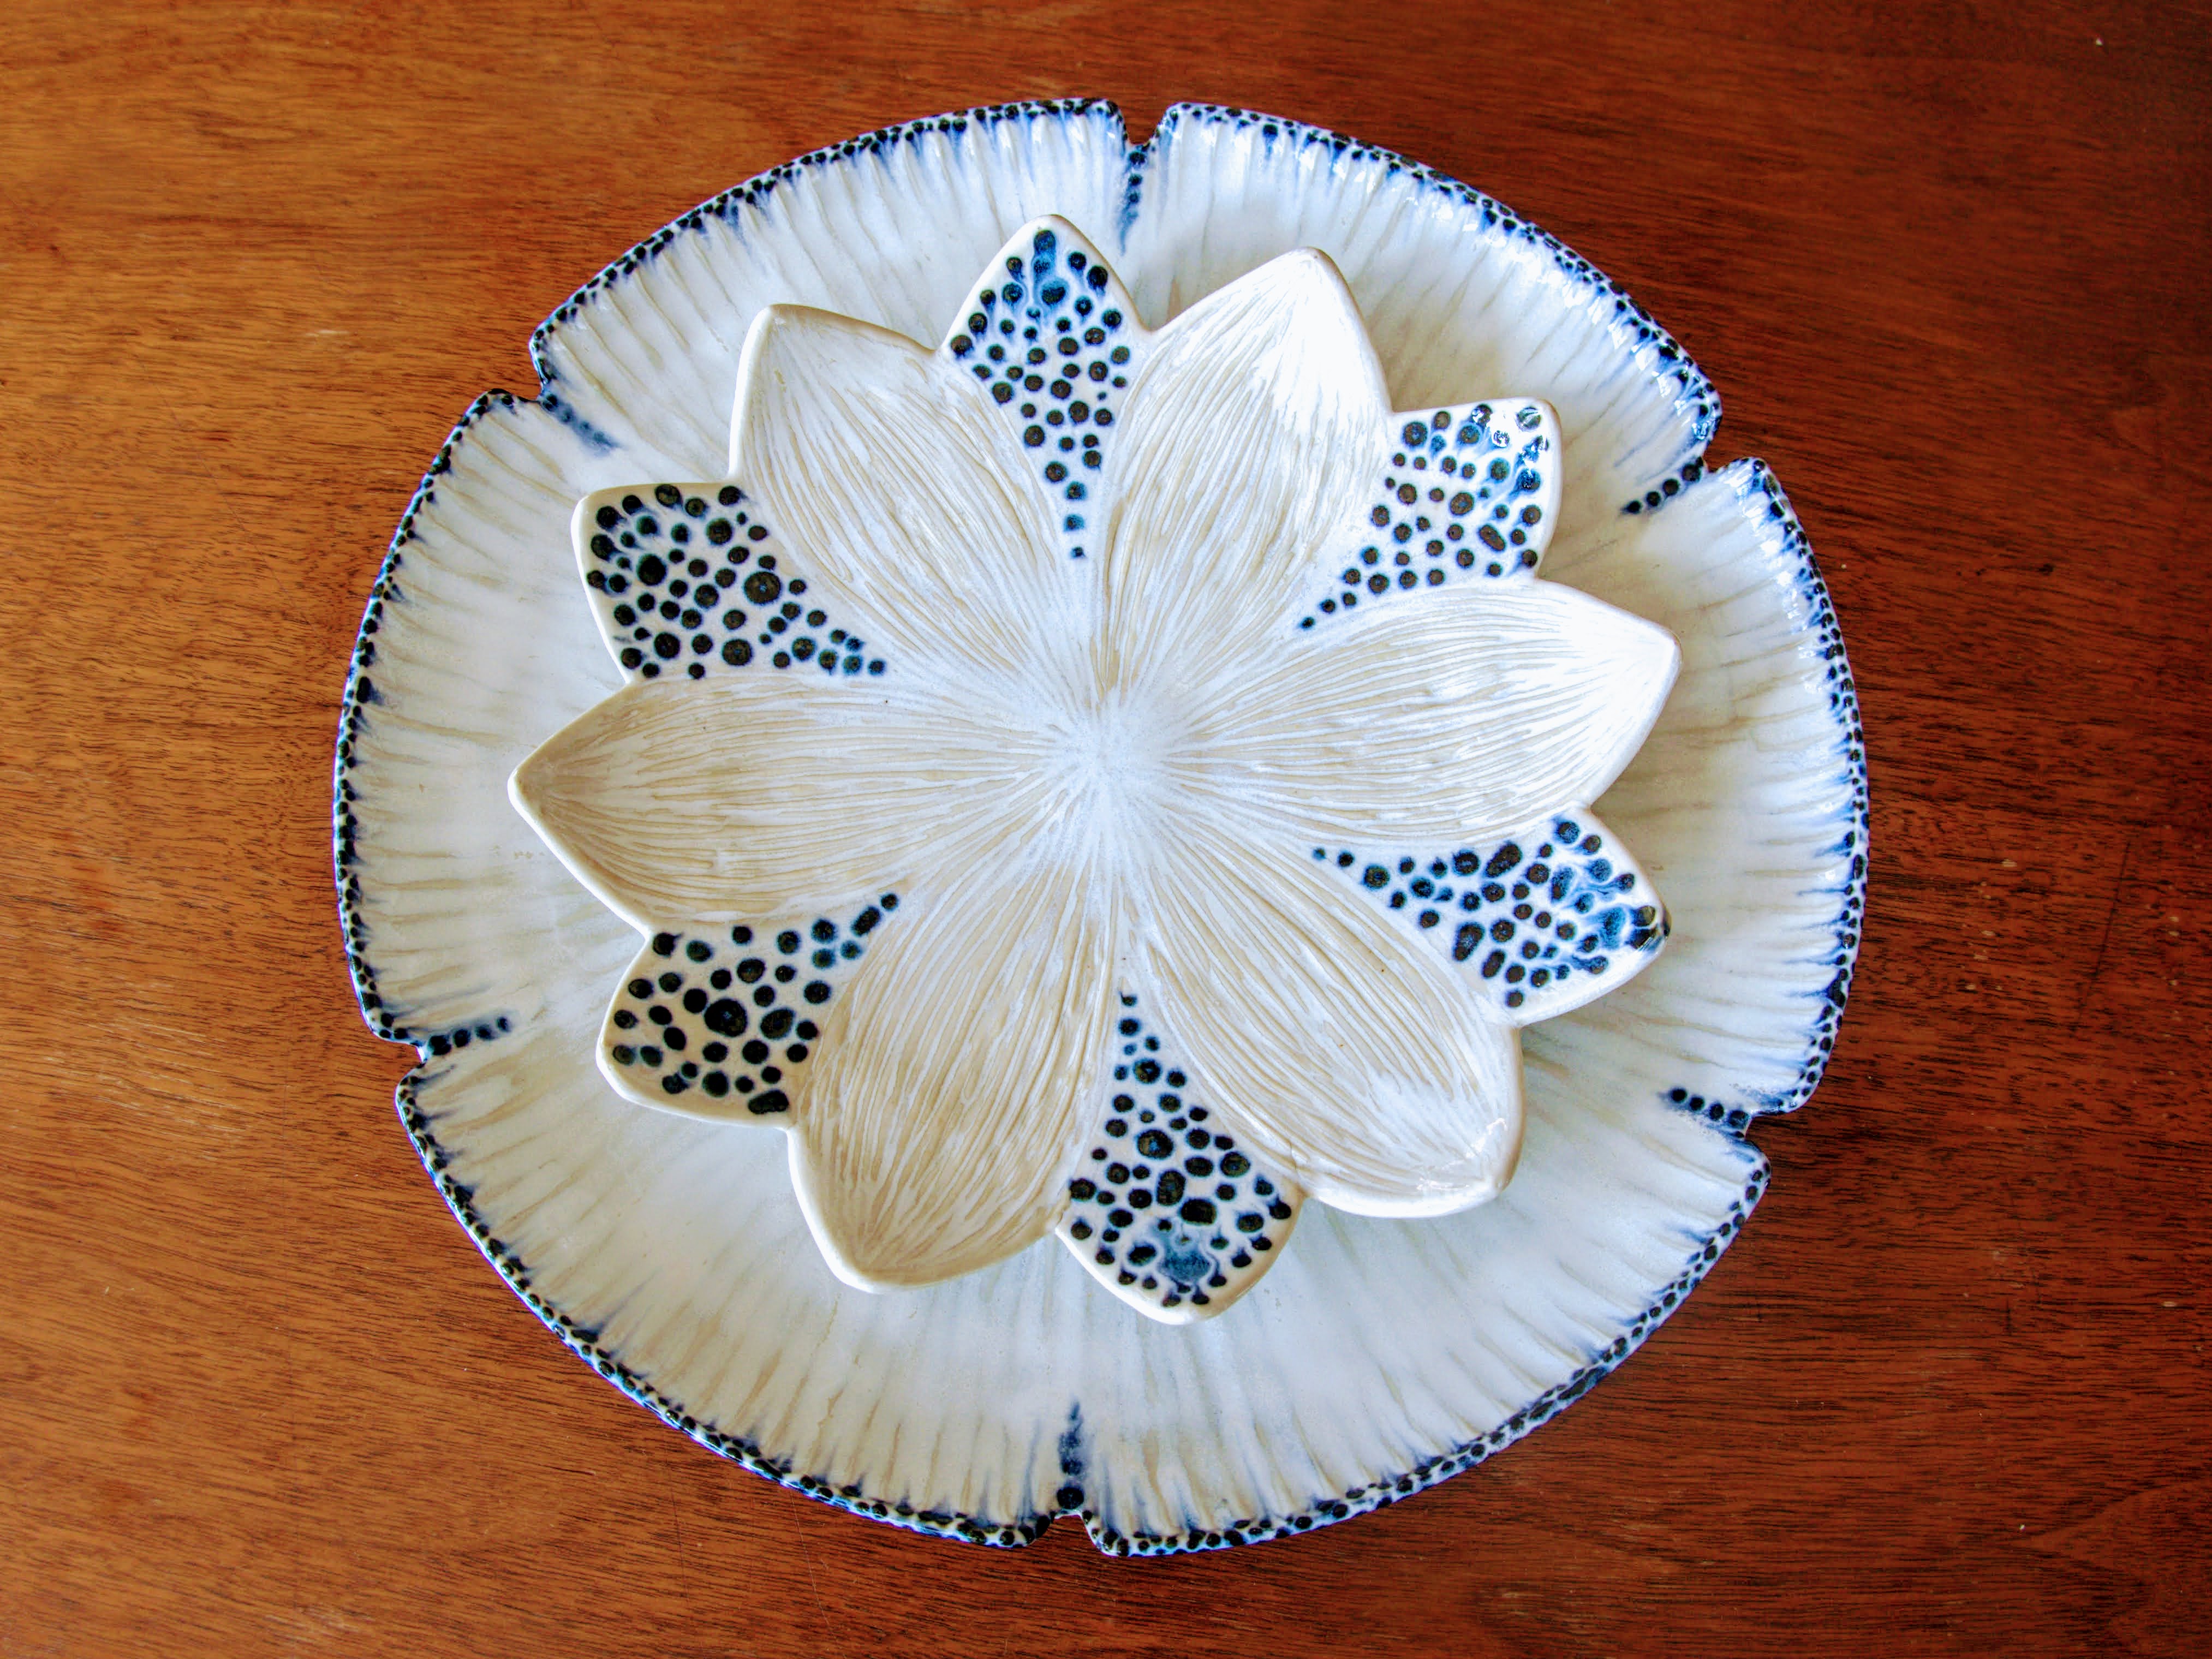 Tini Pinto’s dinner plates, 11 in. (28 cm) in diameter, wheel-thrown porcelain, fired to cone 6 in an electric kiln.